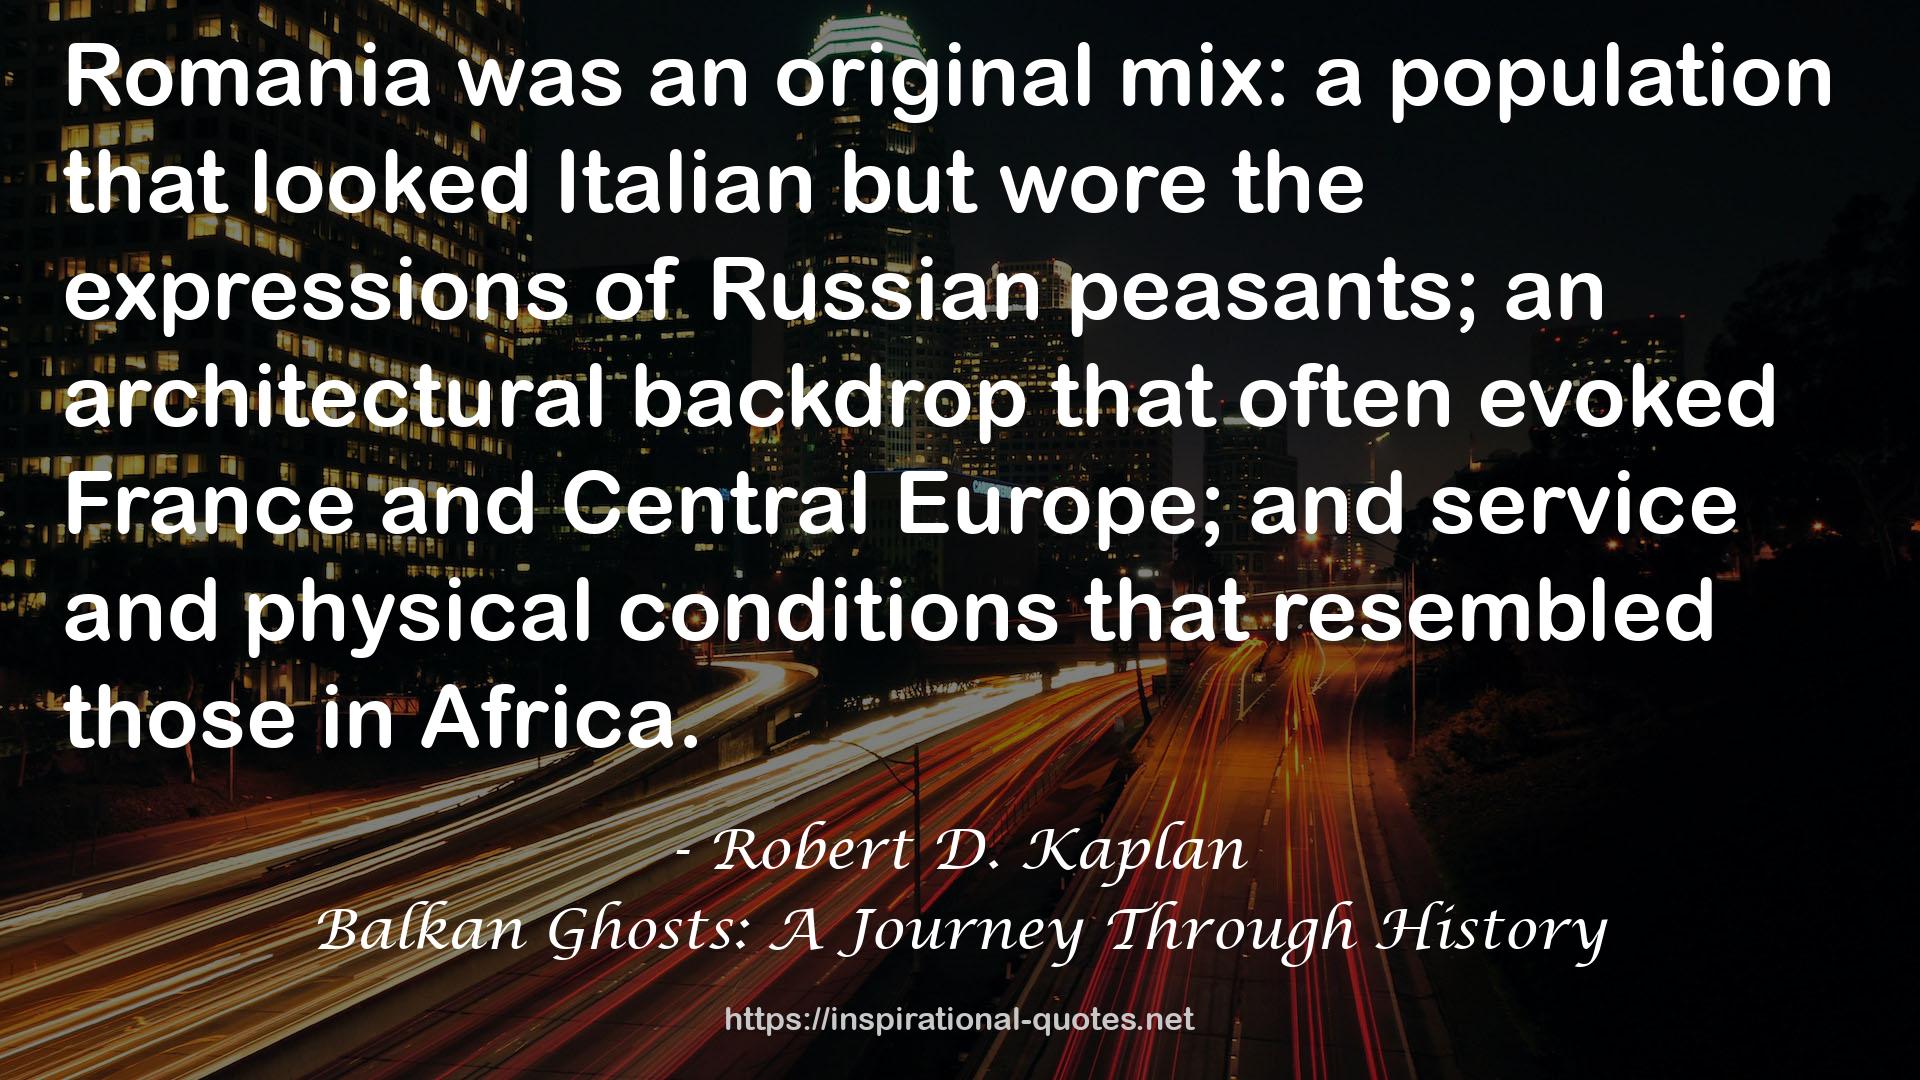 Balkan Ghosts: A Journey Through History QUOTES